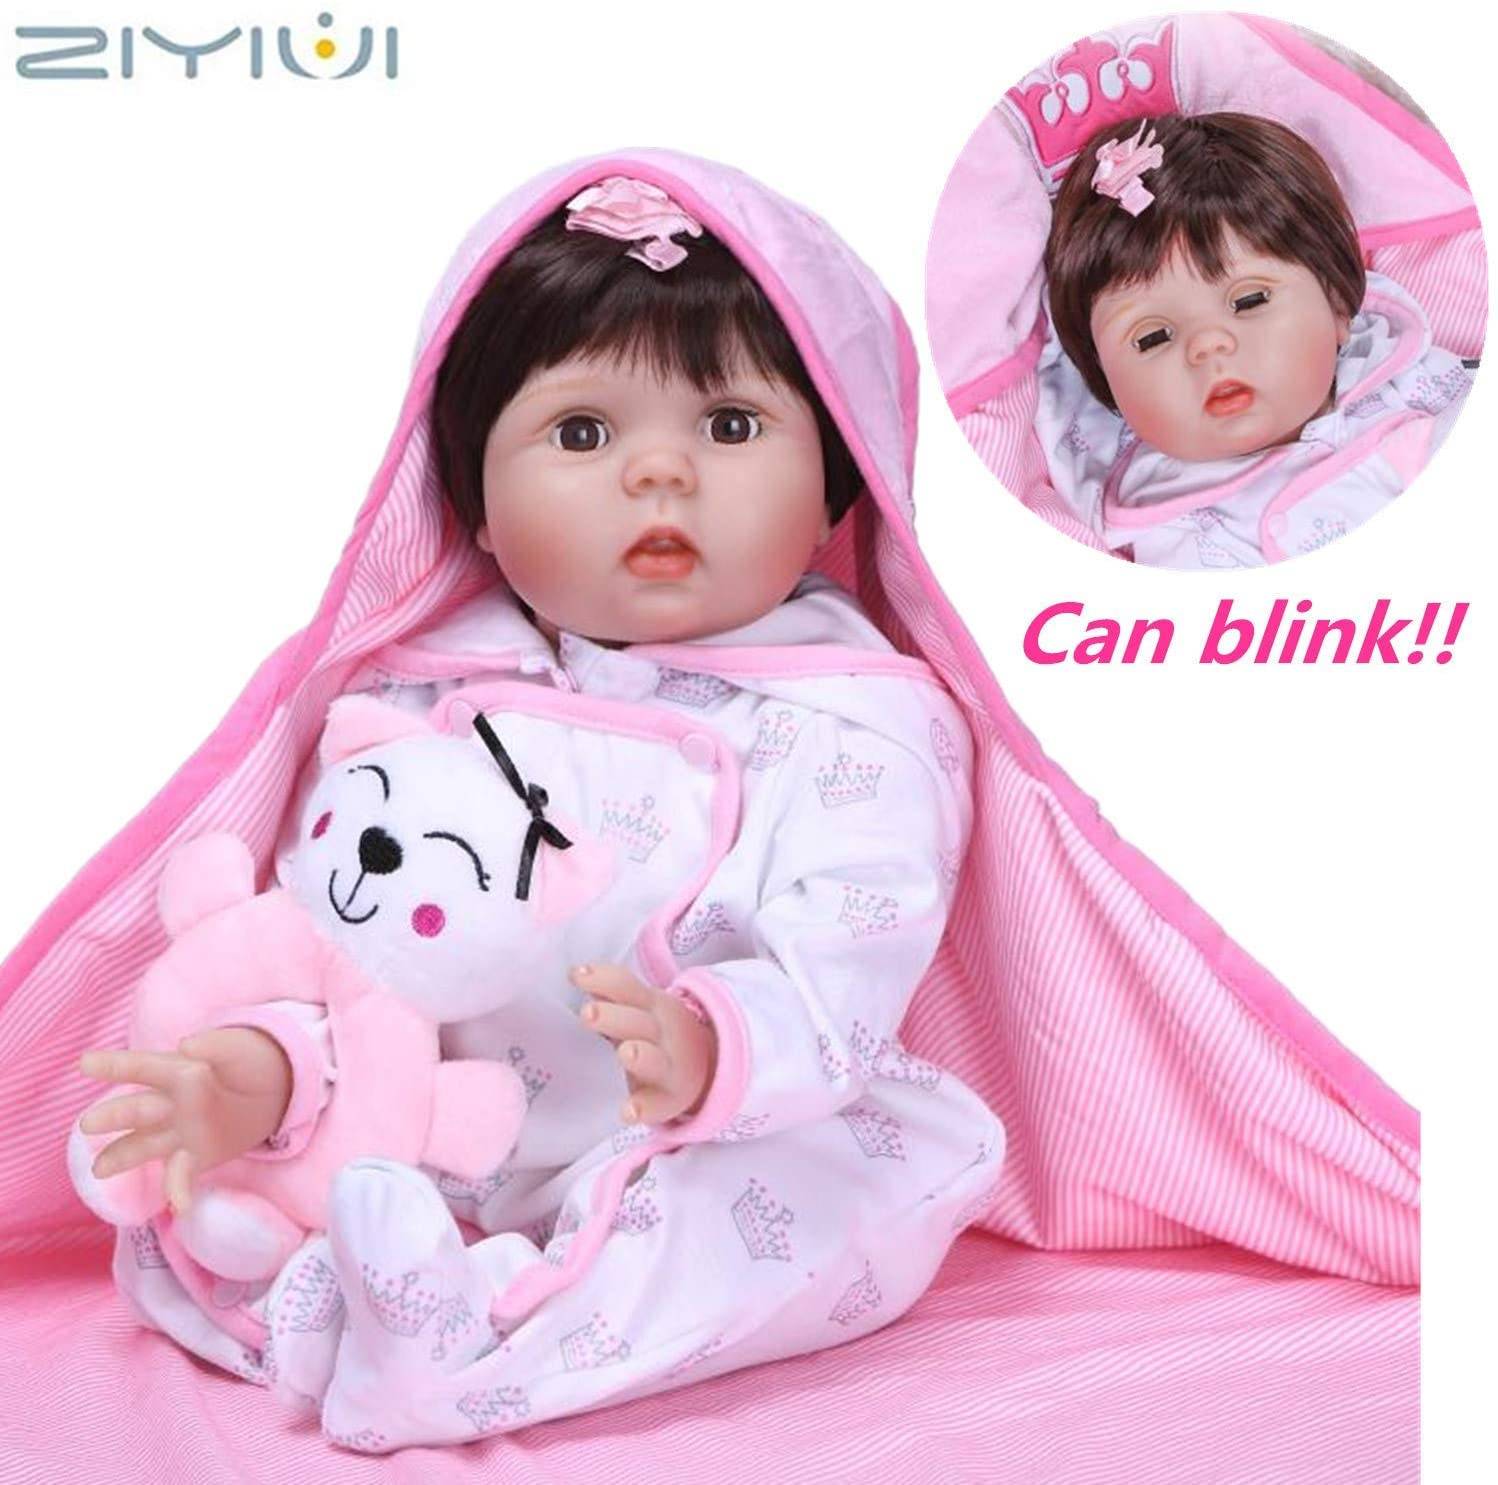 ZIYIUI 22 Inch 55 CM Real Life Reborn Toddler Dolls Soft Vinyl Silicone Real Girl Boy Toy Doll ,Eyes Can Blink Reborn baby doll Featured Image